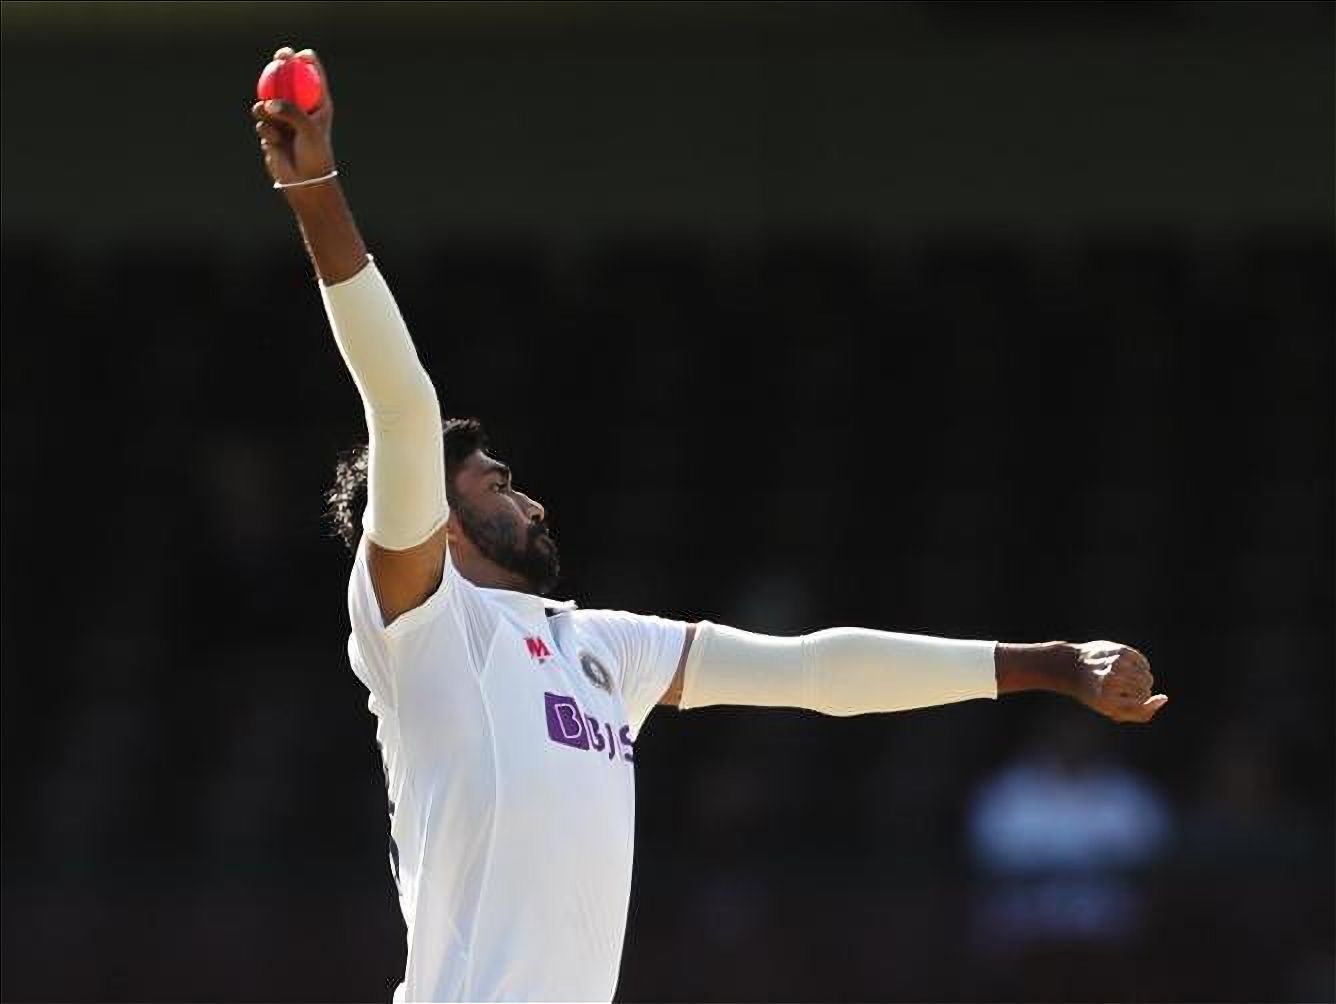 &lt;a href=&#039;https://www.sportskeeda.com/player/jasprit-bumrah&#039; target=&#039;_blank&#039; rel=&#039;noopener noreferrer&#039;&gt;Jasprit Bumrah&lt;/a&gt; has taken 2 wickets in the two pink-ball Tests he has played thus far